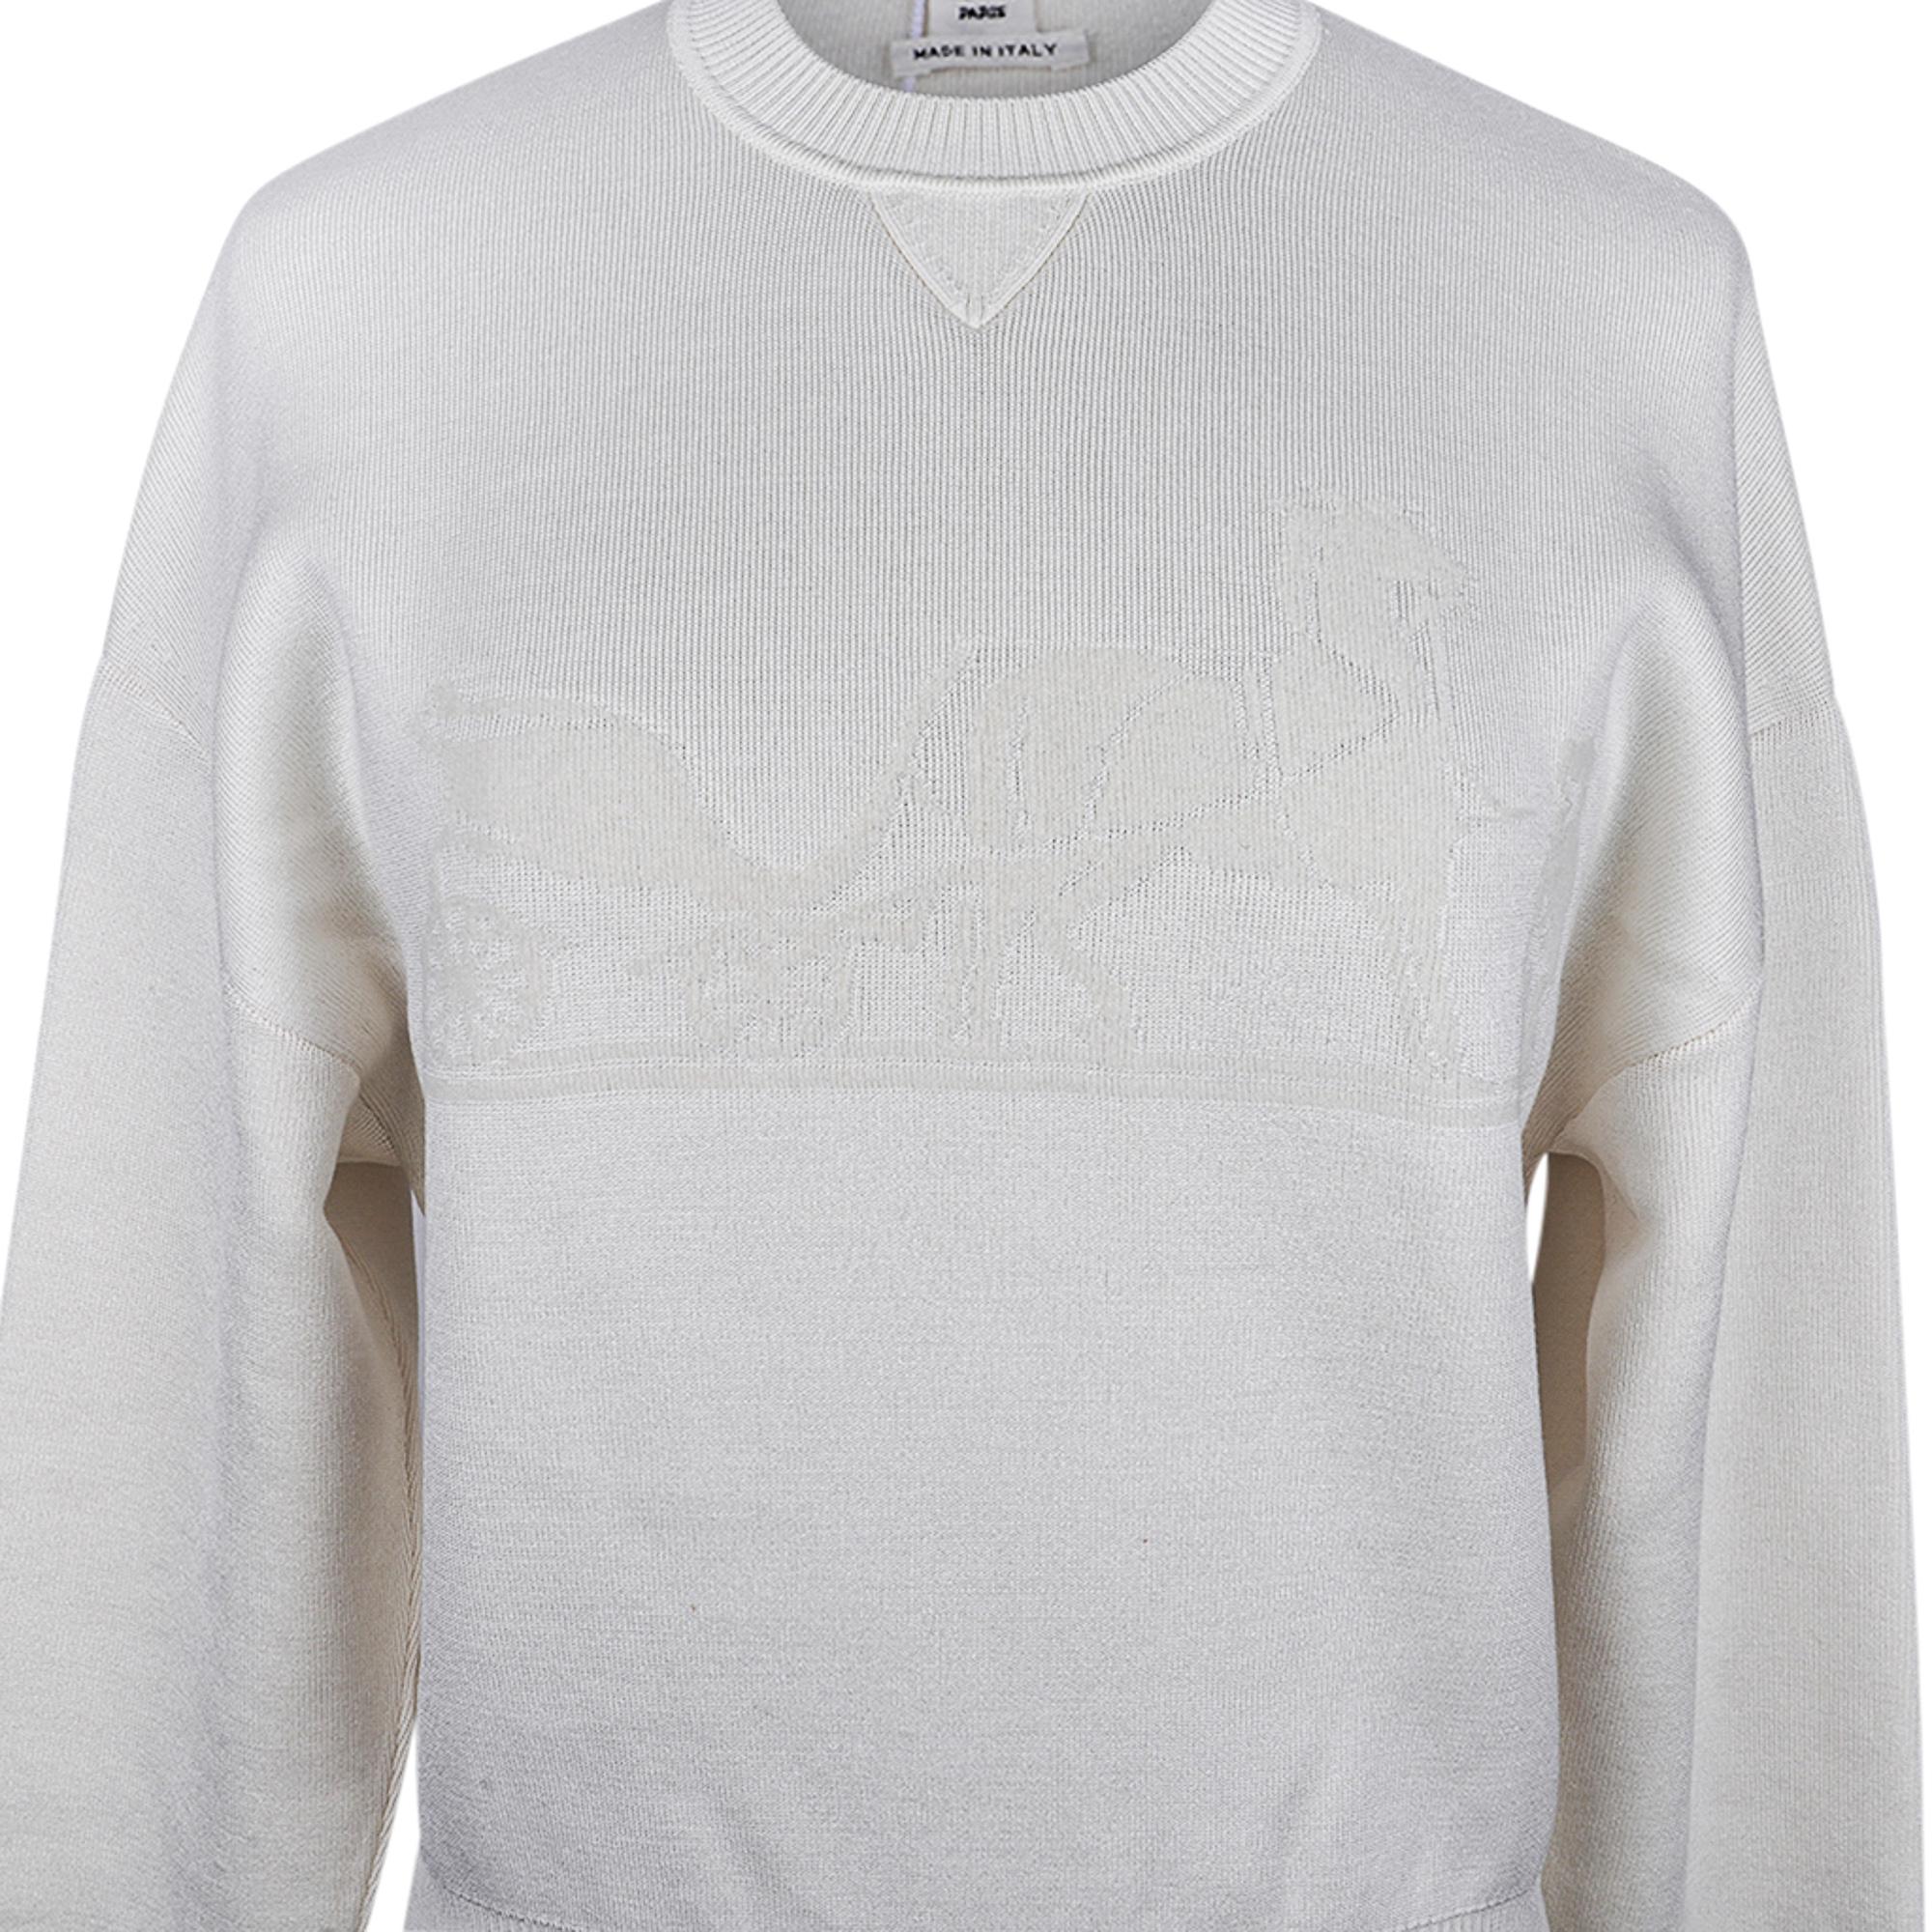 Mightychic offers an Hermes Ex-Libris sweater featured in Winter White.
Slight drop shoulder, crewneck wool knit in a flattering shade of Winter White.
The iconic Ex-Libris subtly woven in.
No longer produced, this fabulous piece is a great